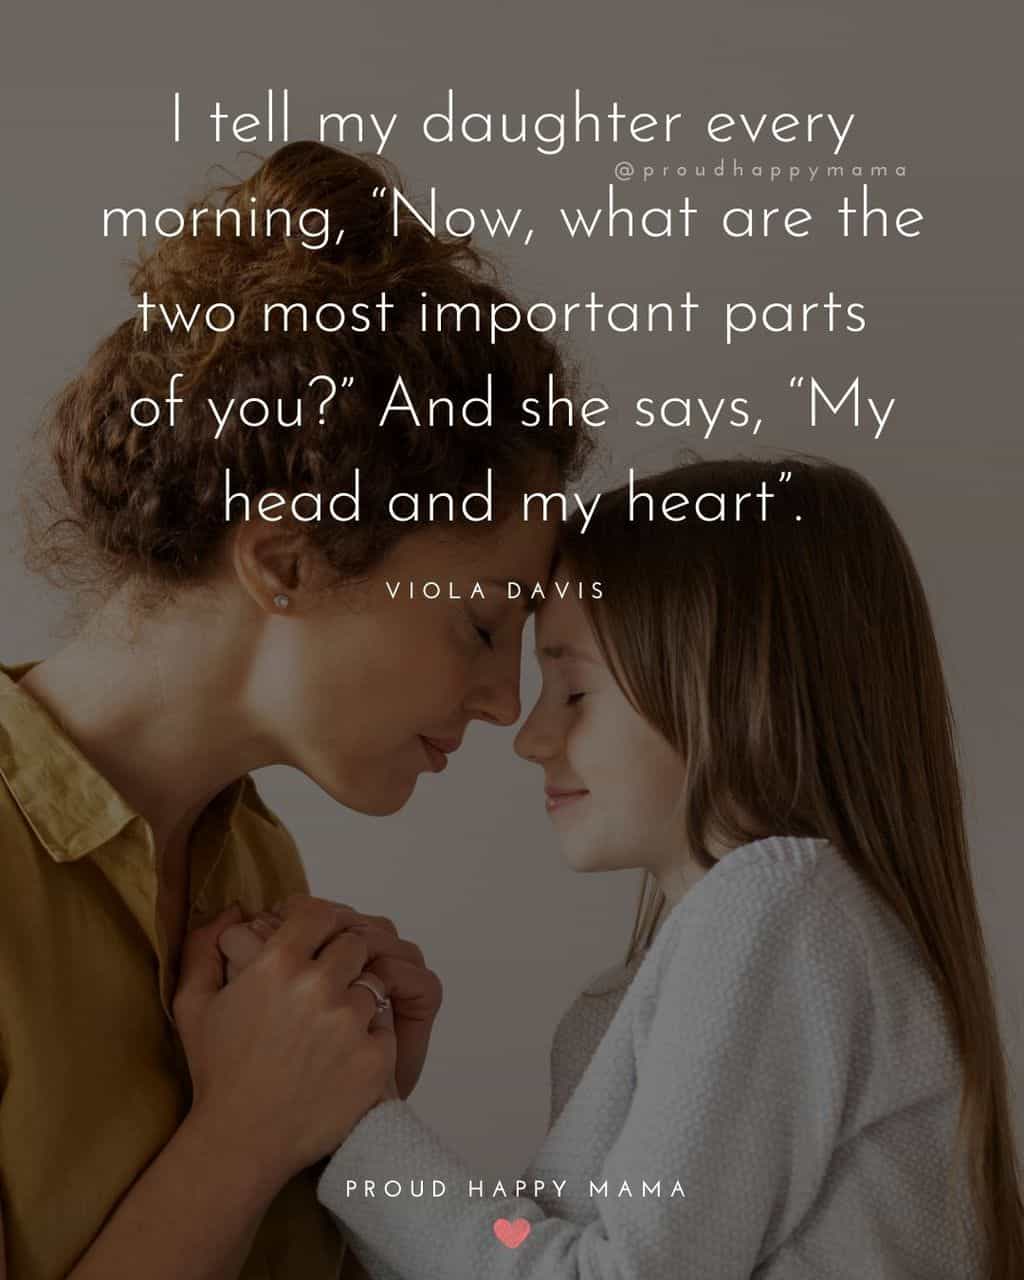 special daughter quotes - ‘I tell my daughter every morning, “Now, what are the two most important parts of you?” And she says, “My head and my